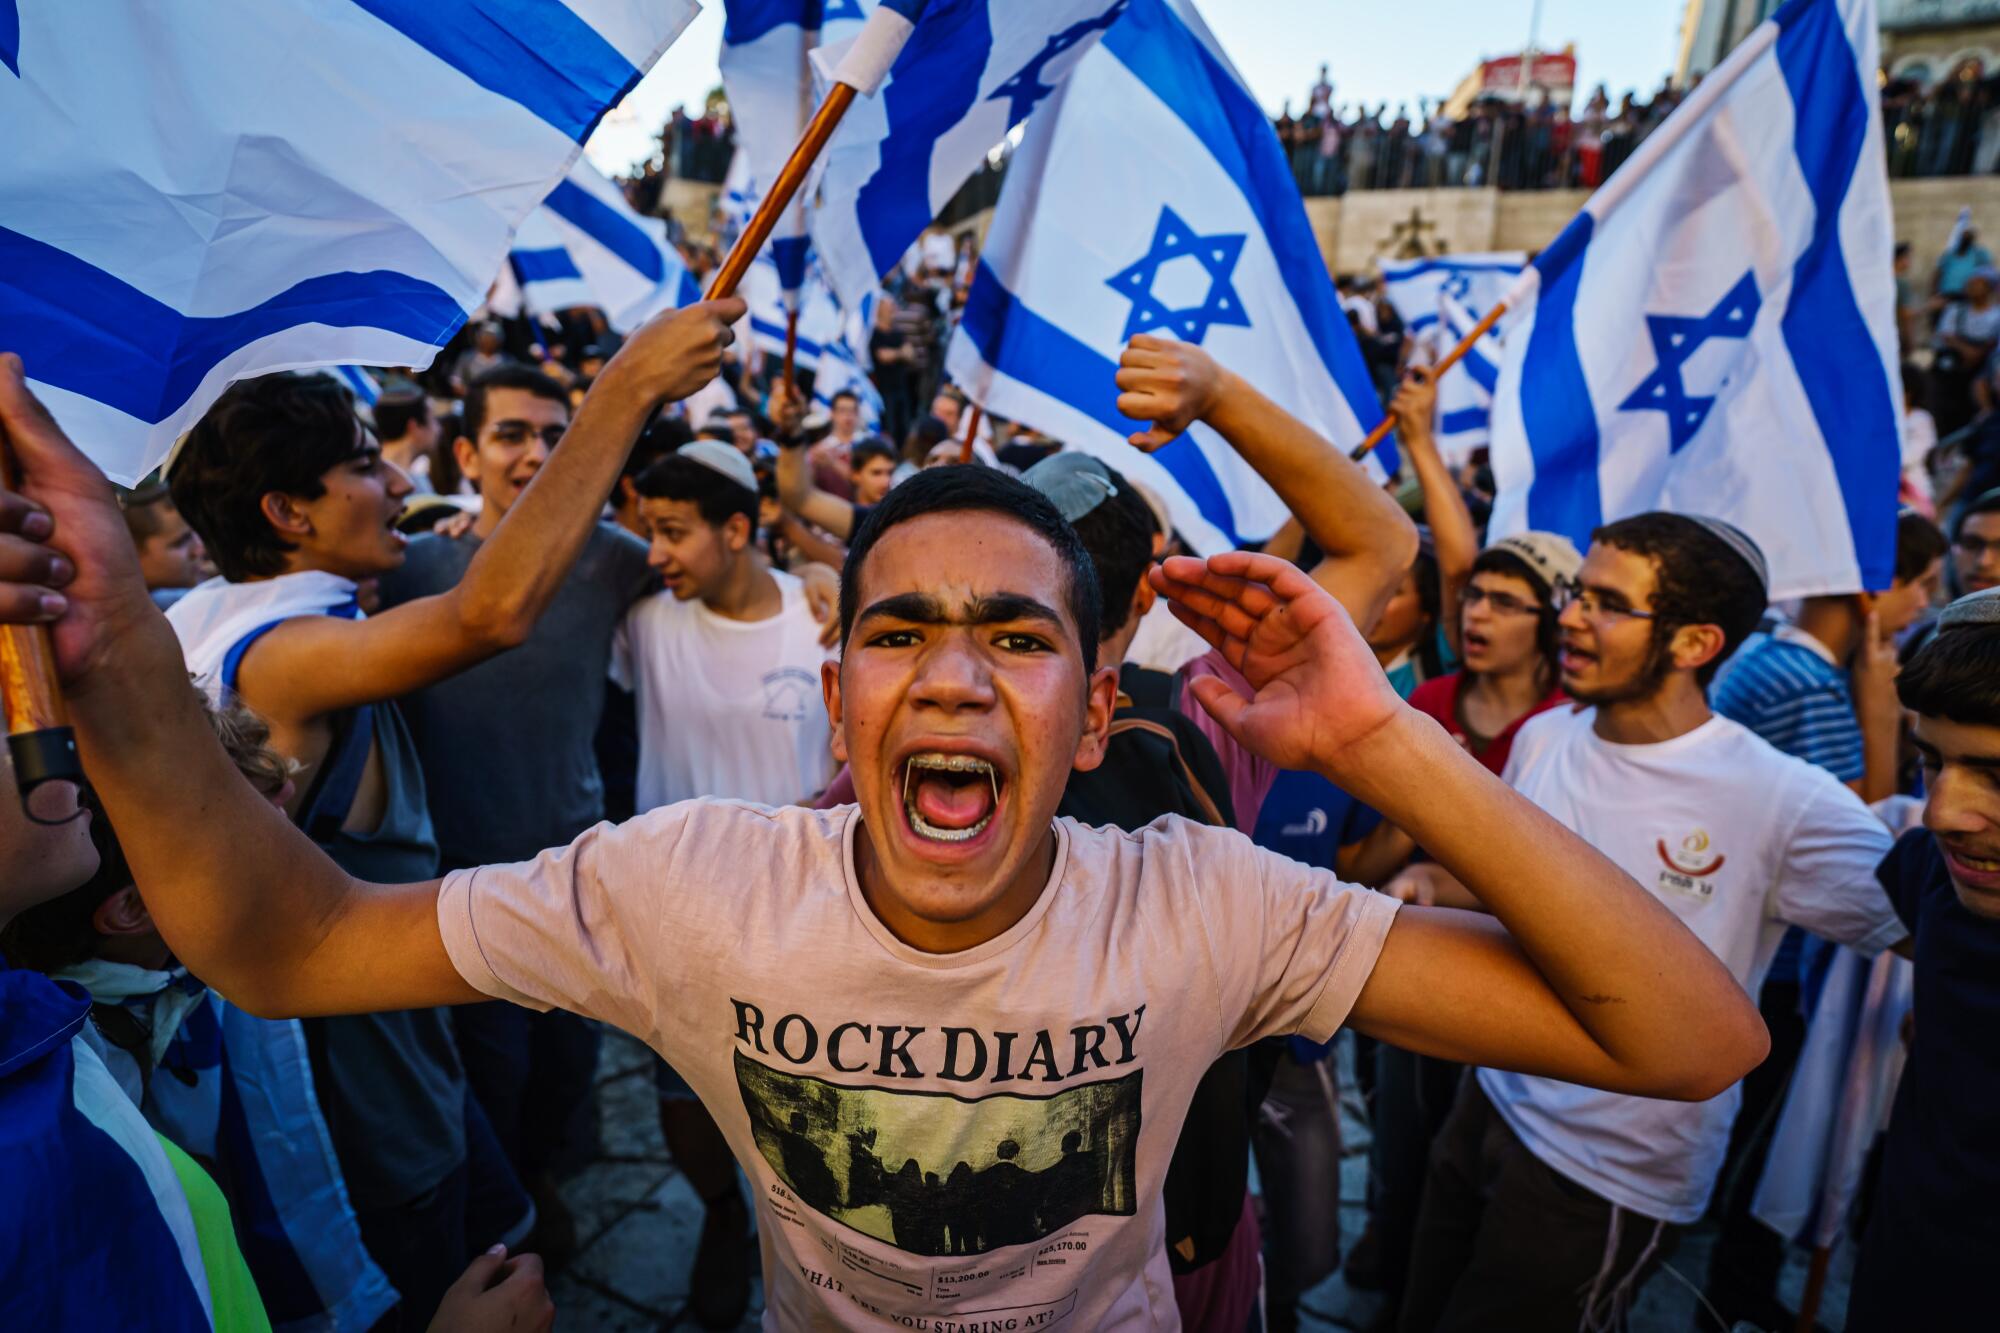 A young man with braces and wearing a "Rock Diary" T-shirt yells amid other young men waving Israeli flags.